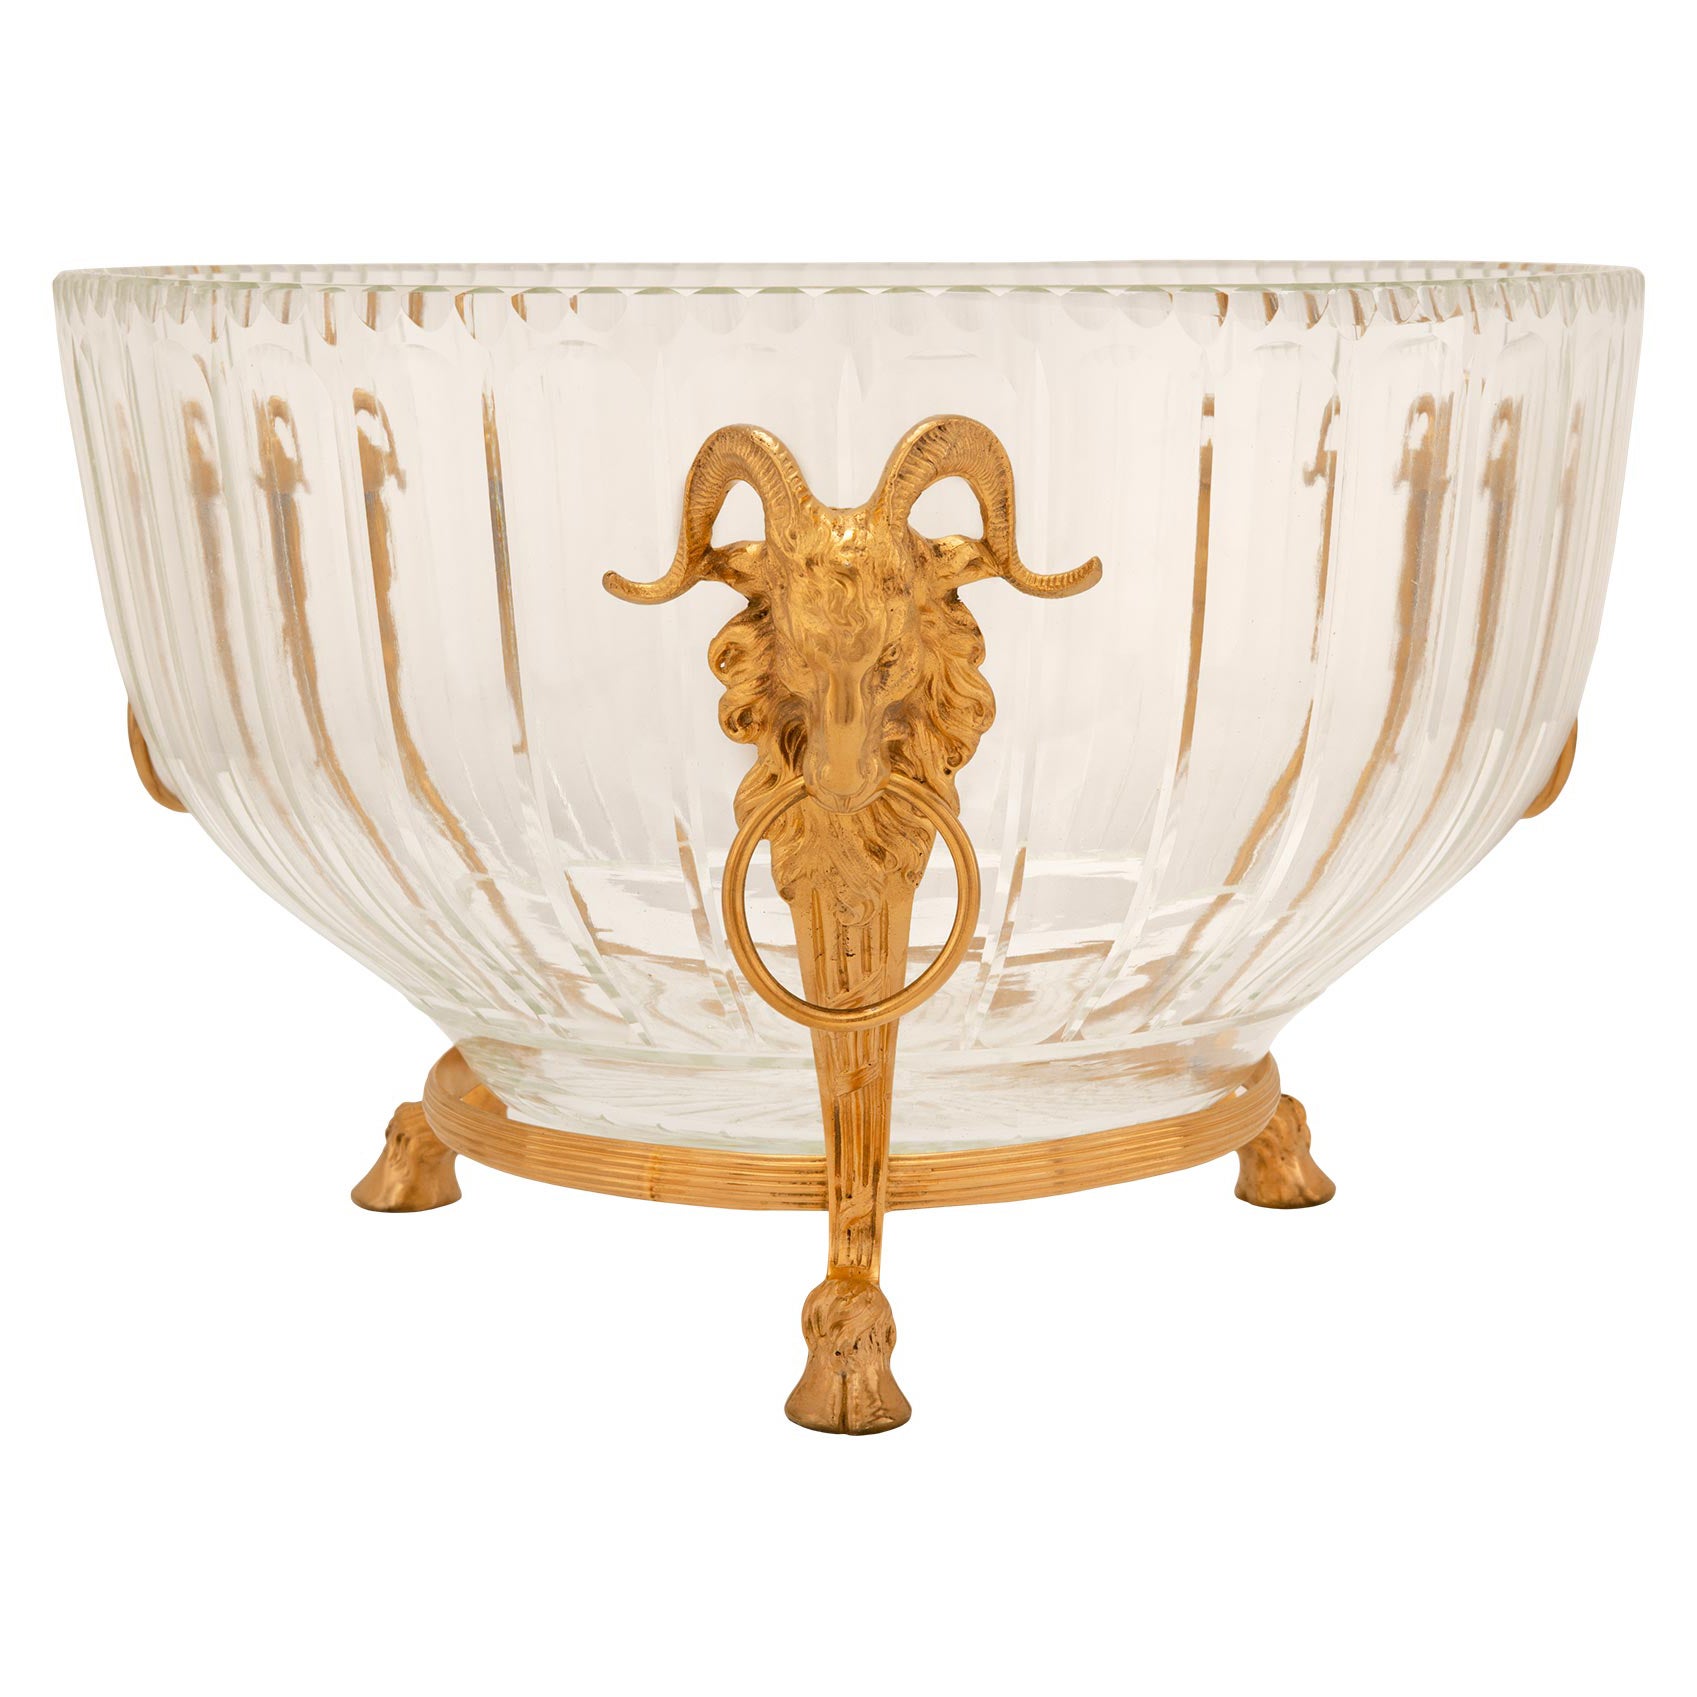 French 19th Century Louis XVI St. Baccarat Crystal Centerpiece Bowl